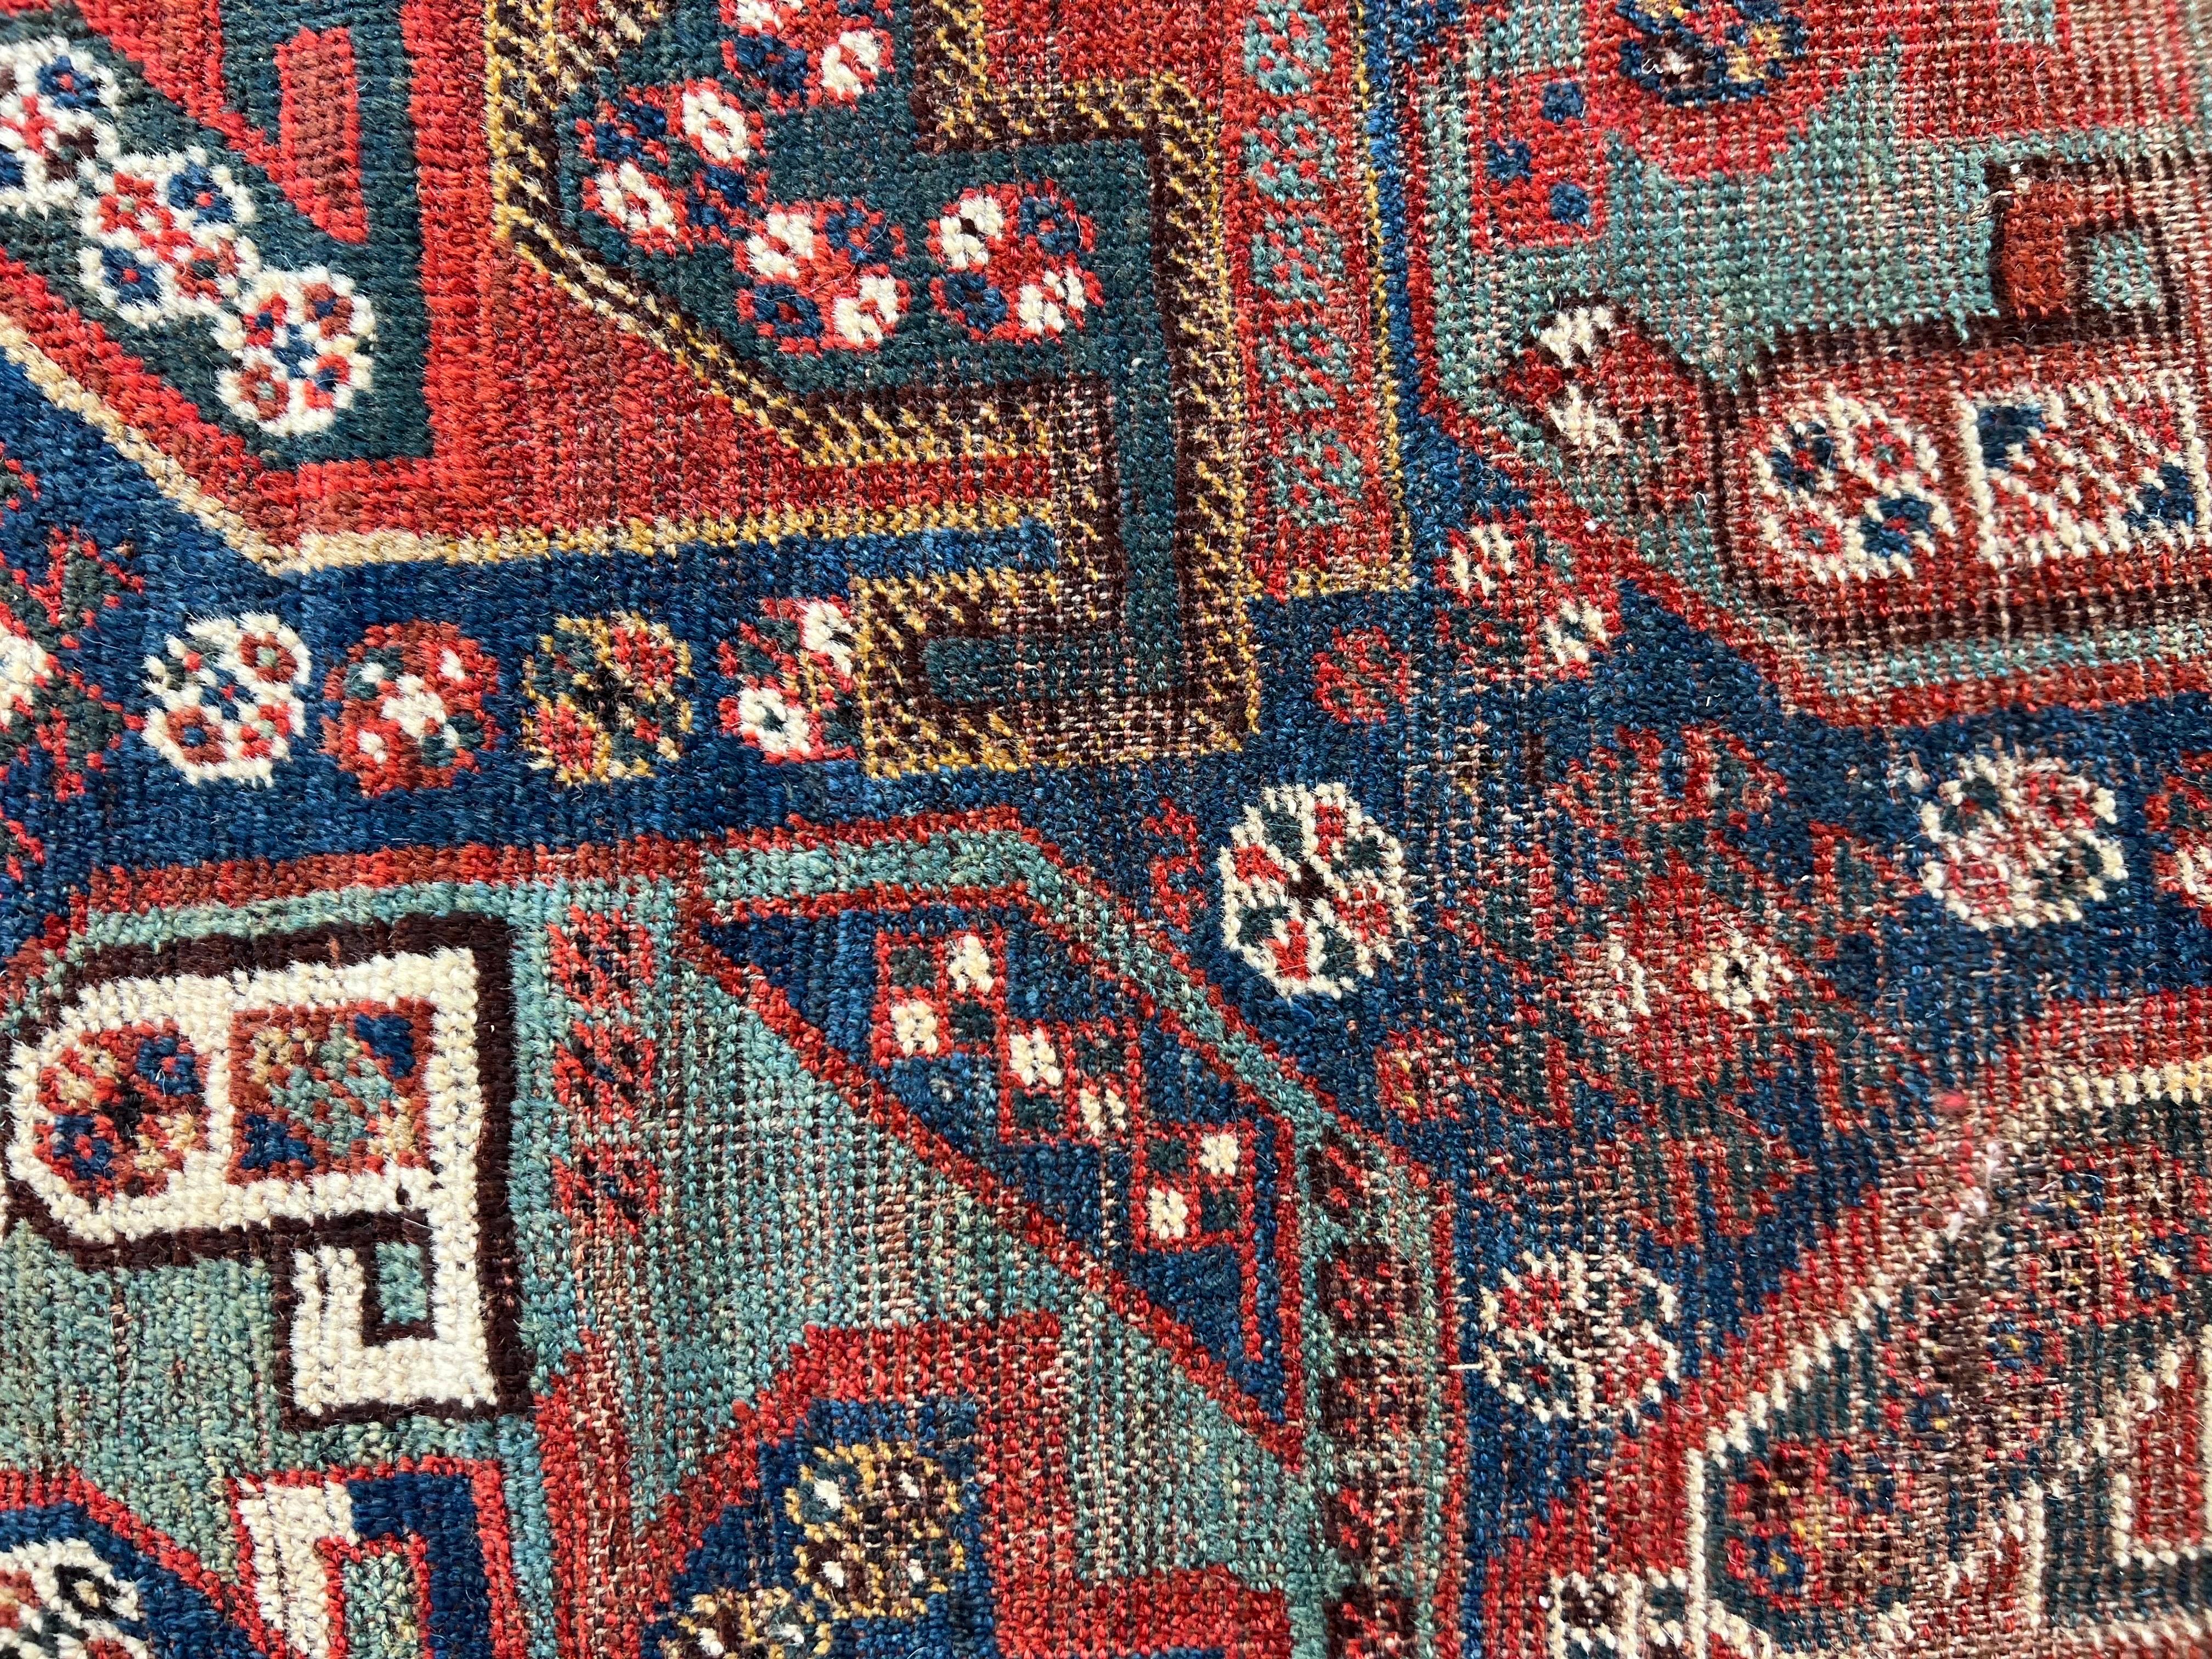 Tribal rugs made in Shiraz and surrounding areas were usually no larger than 6 x 9, so this nearly 8 x 10 size is quite rare! The rug does have areas of wear down to the foundation - see photos. The foundation of this tribal rug is a gray/brown